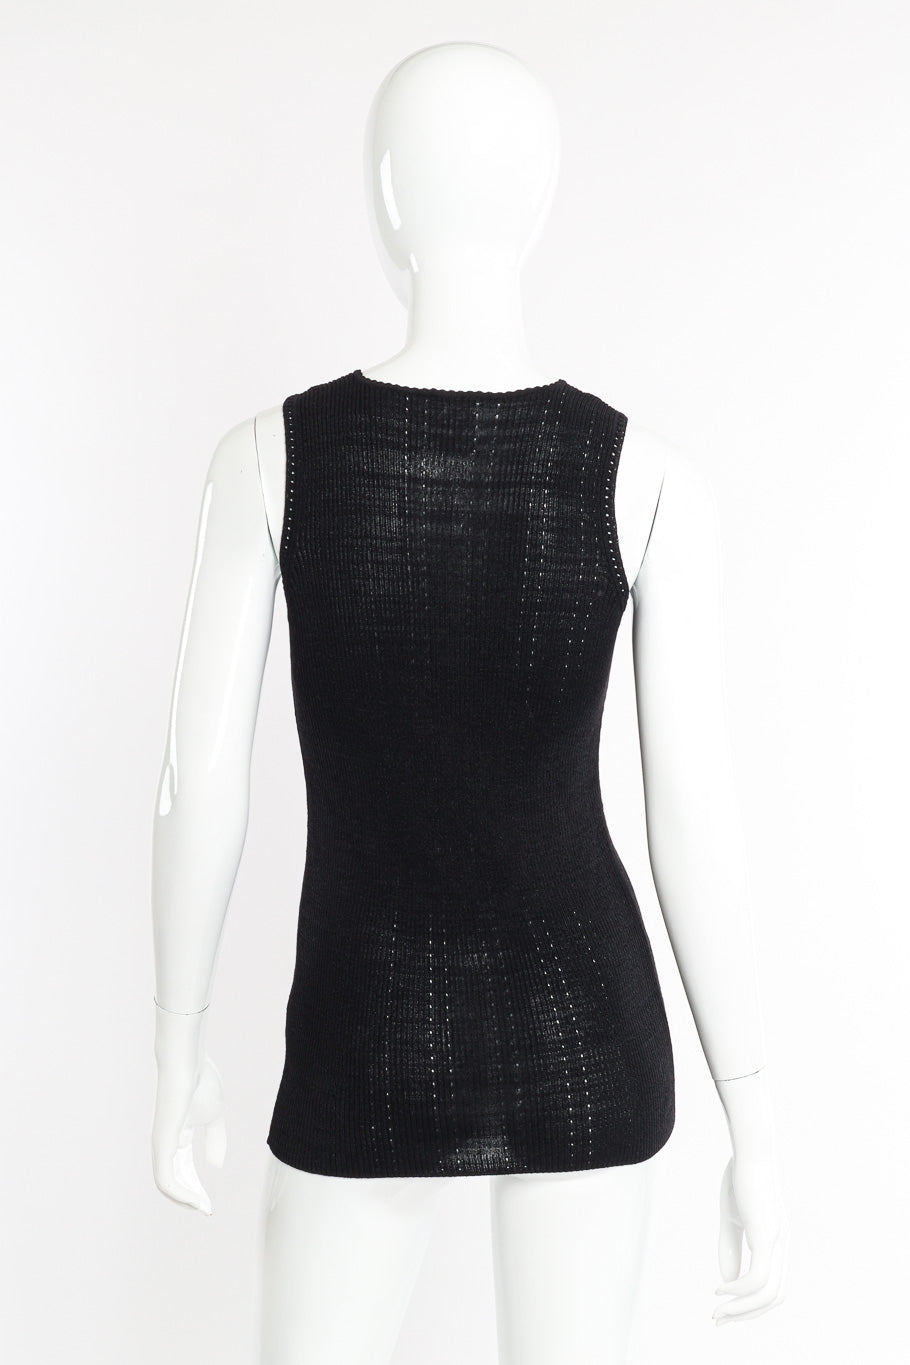 Chanel Logo Knit Tank Top back view on mannequin @Recessla